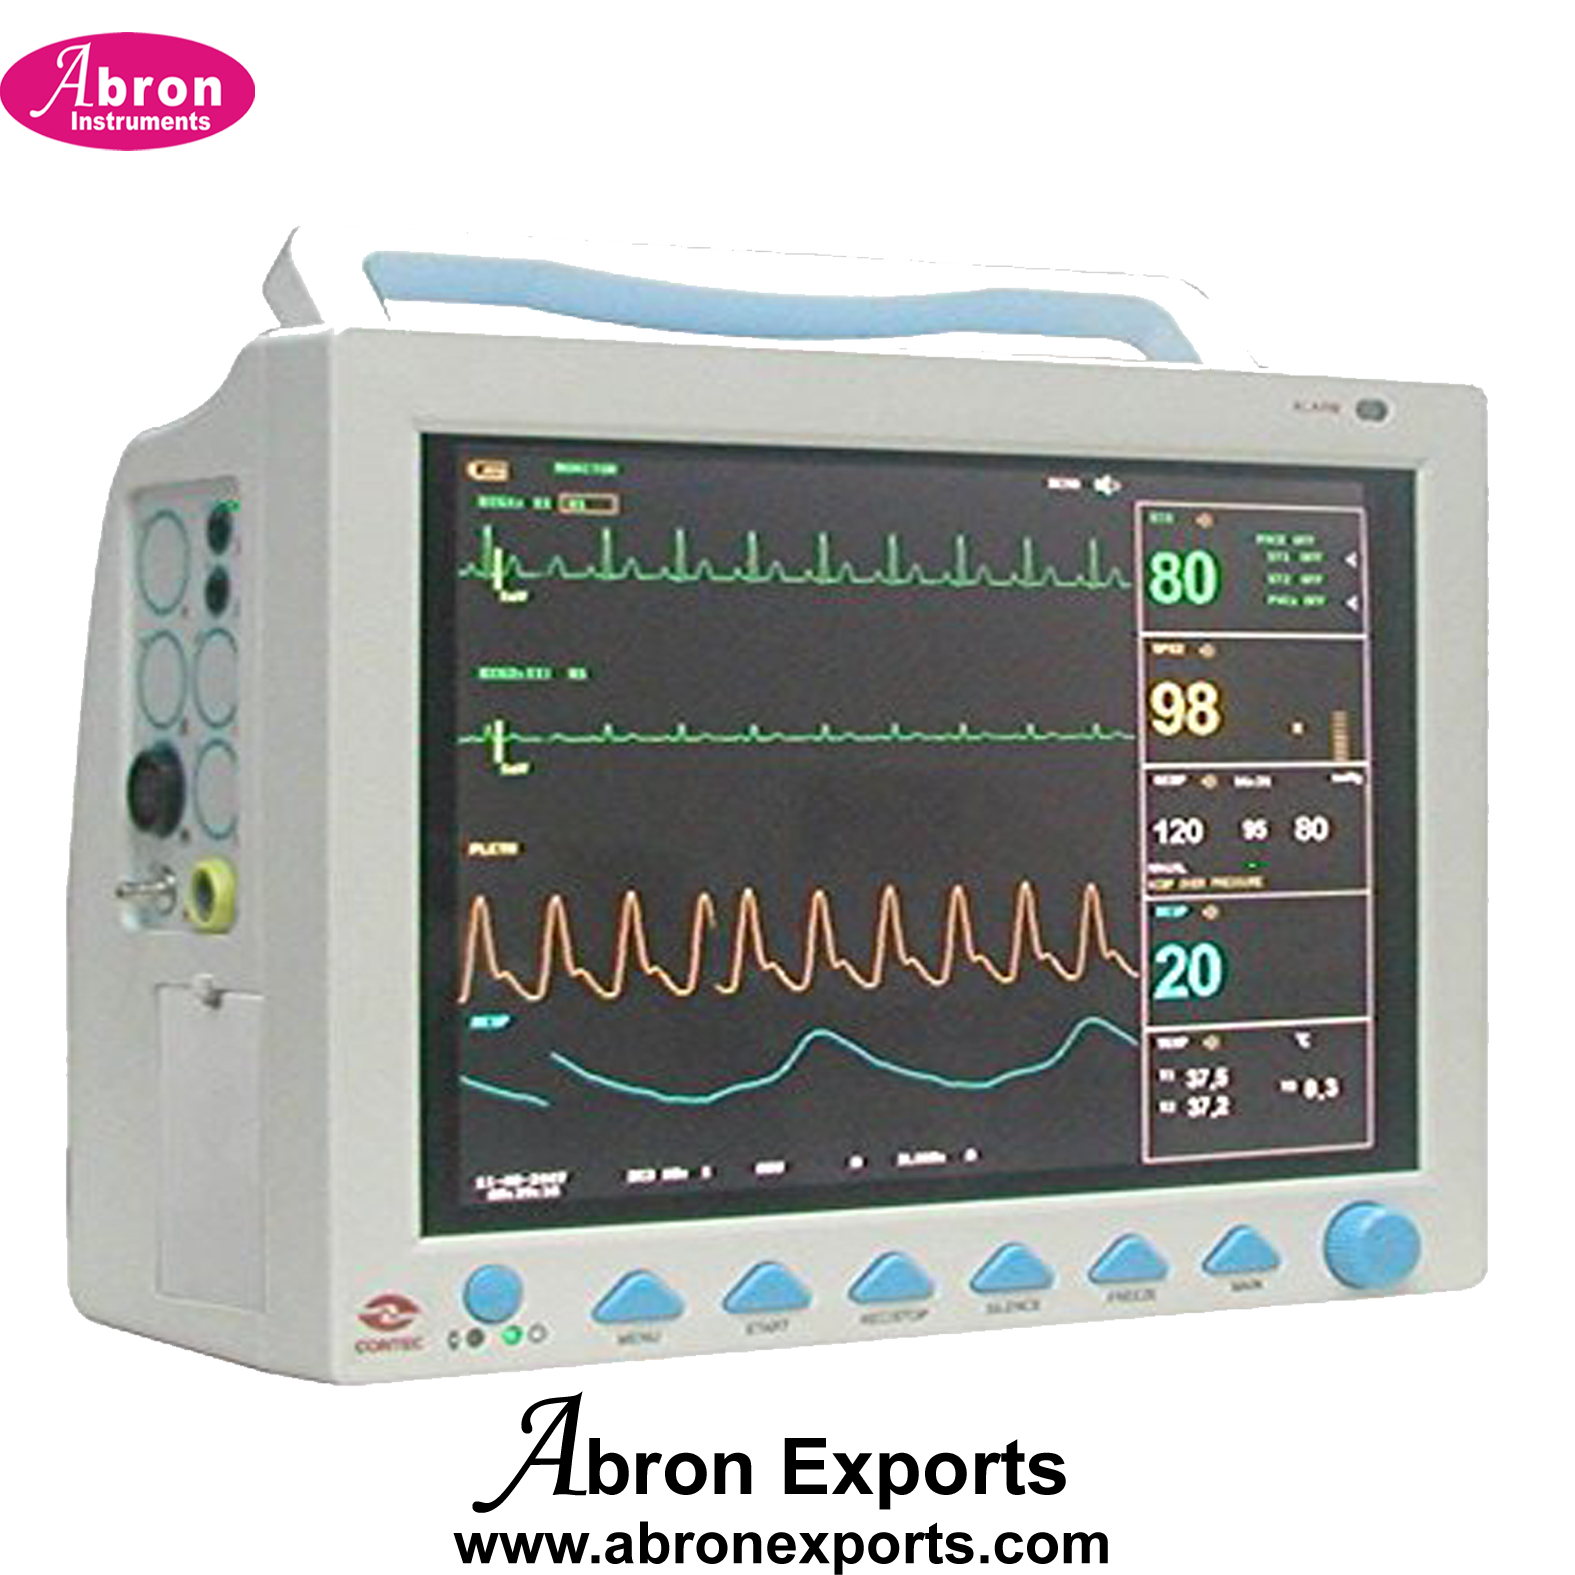 Patient Monitor BP Pulse SPO2 NIBP with Stand Parameters 96 Hour Backup Battery Abron ABM-2710A 